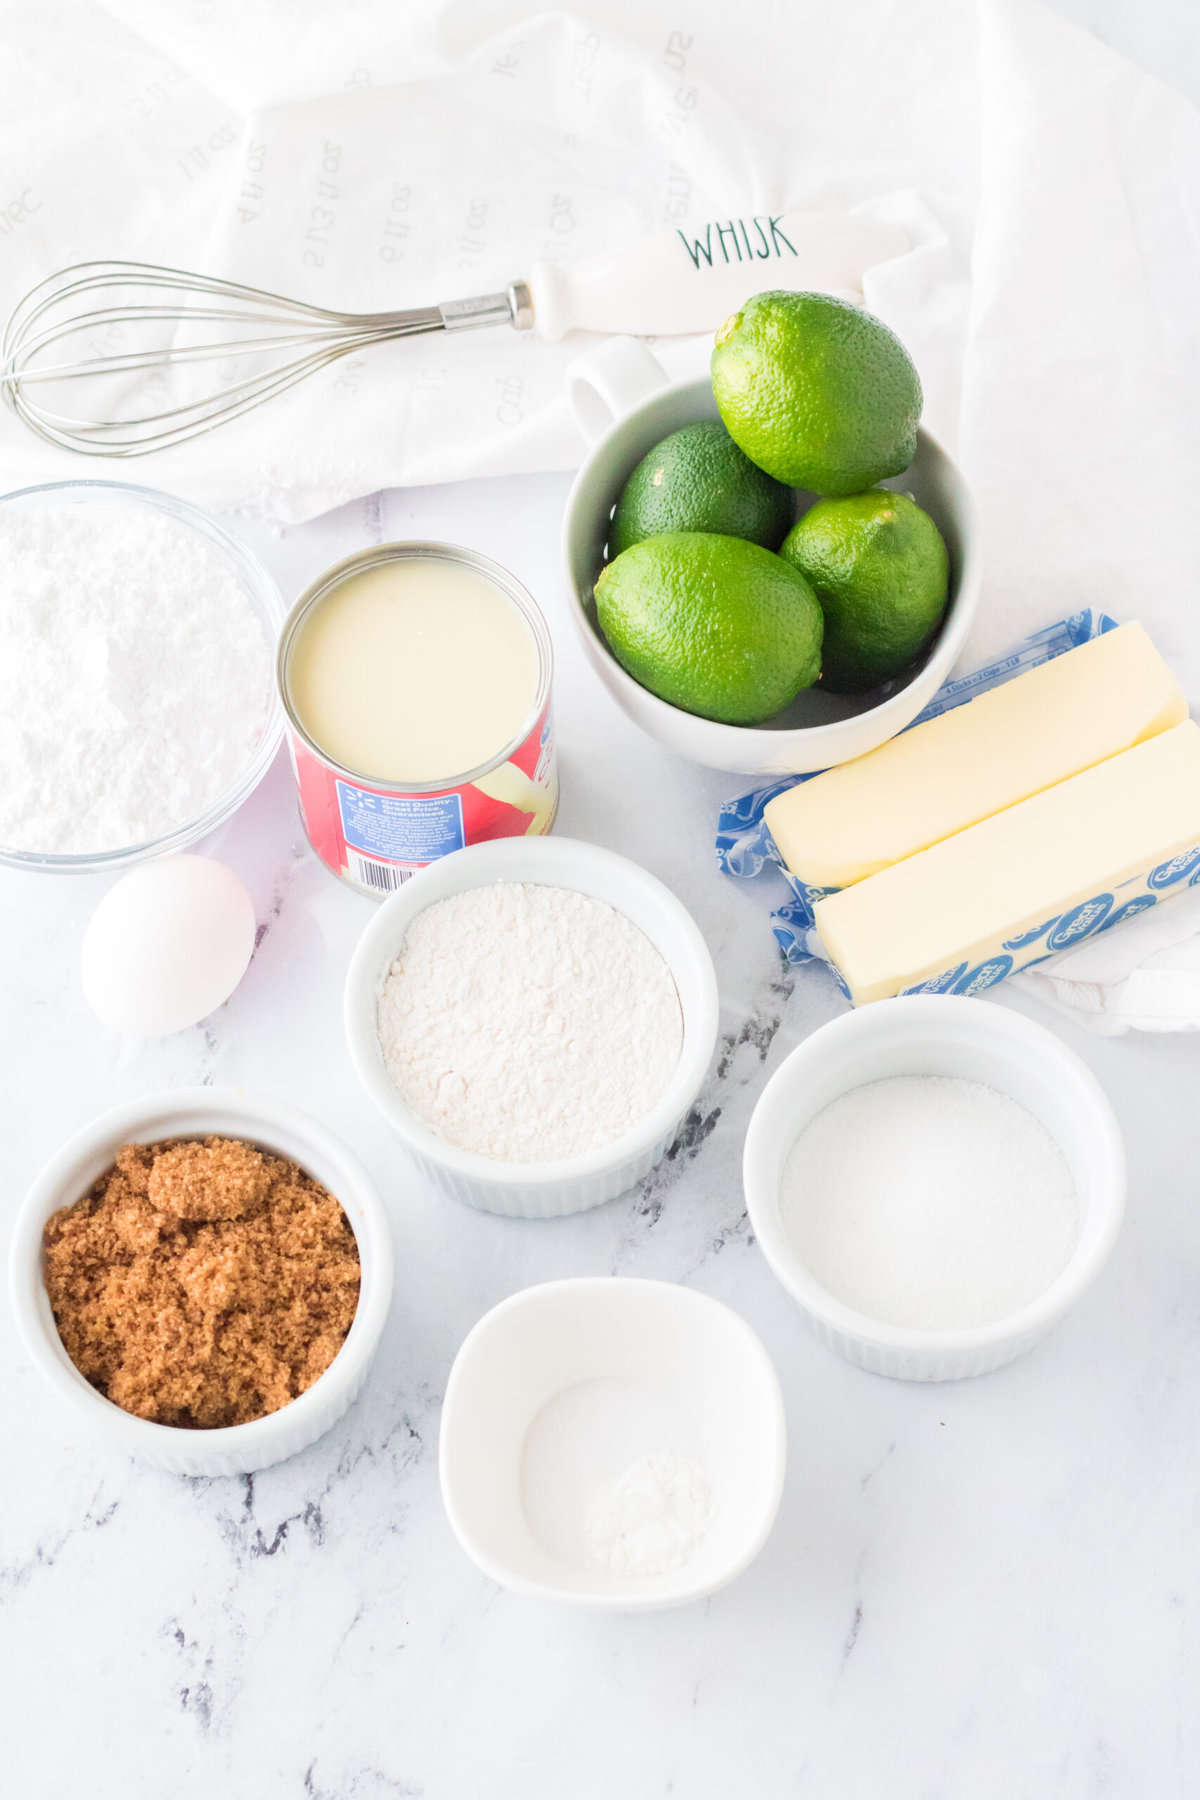 The ingredients for key lime pie cookies are presented on a white countertop.